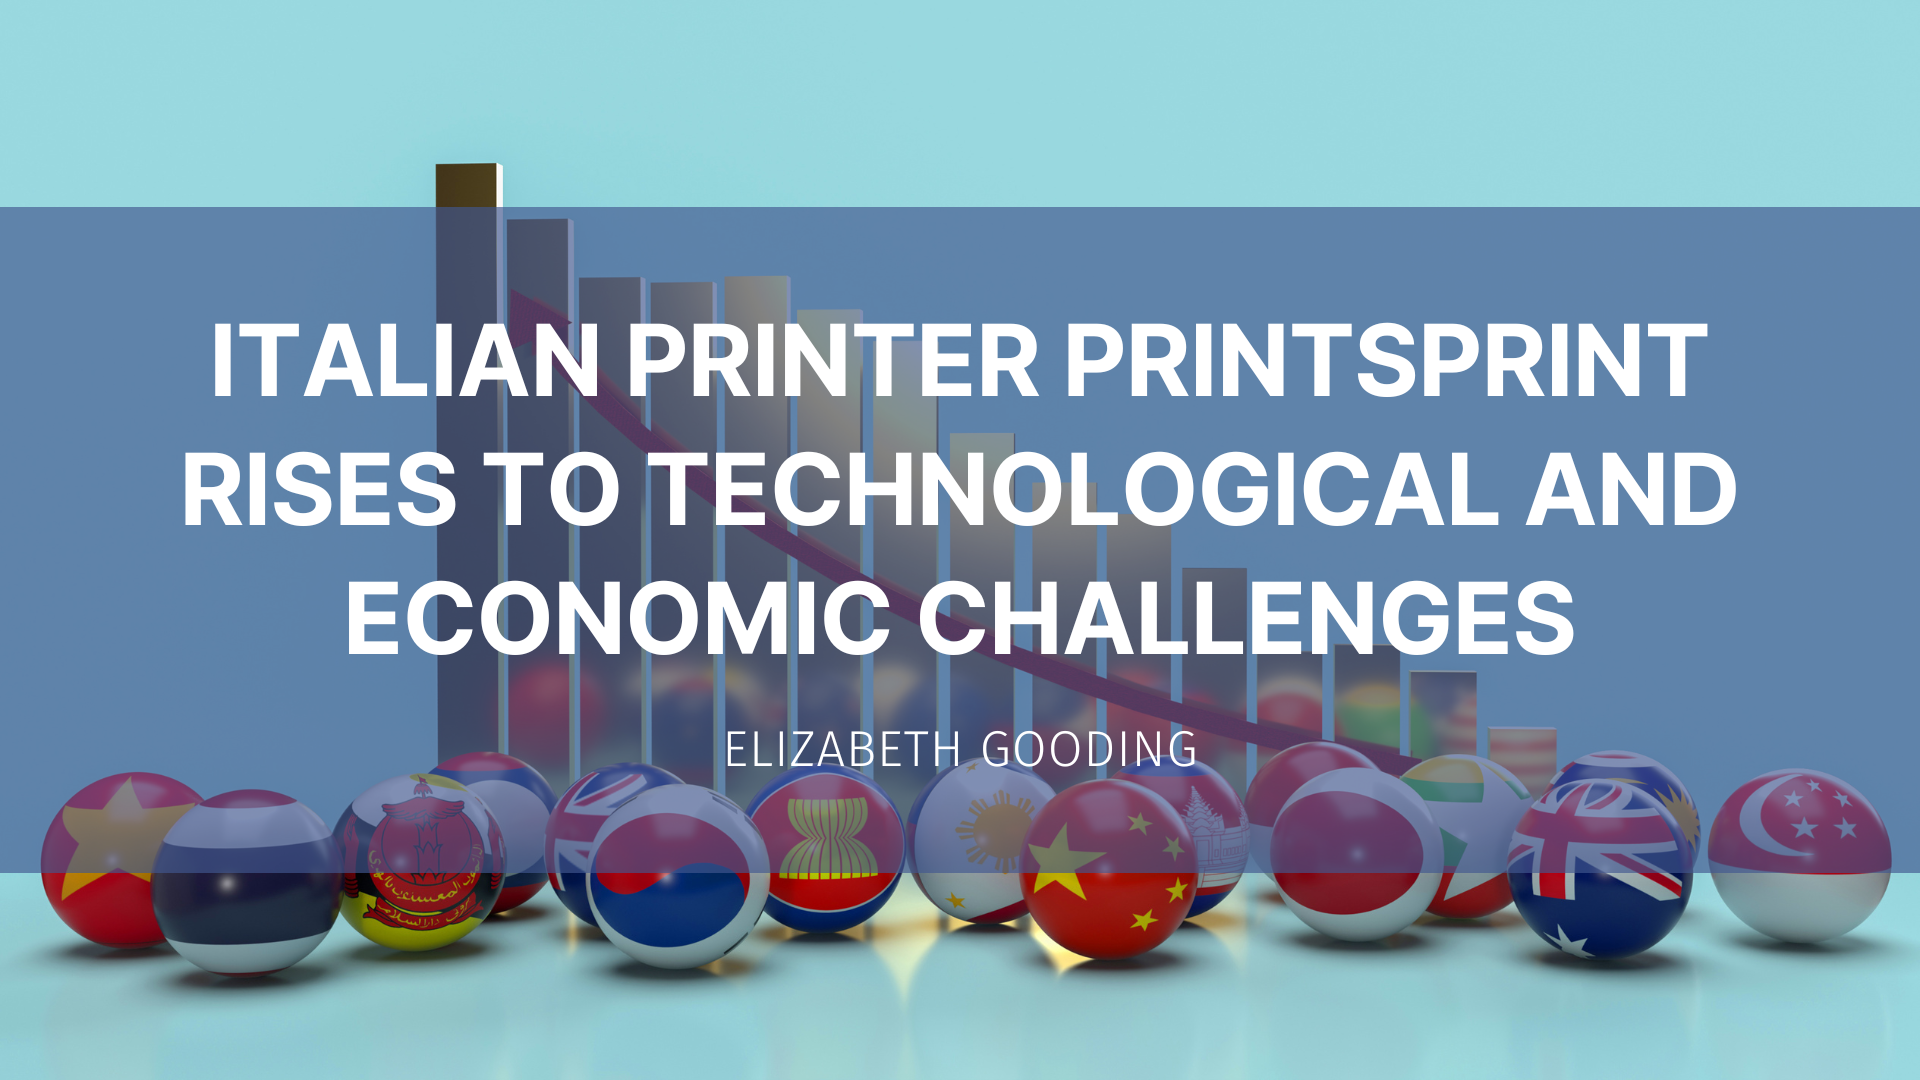 Featured image for “Italian printer PrintSprint rises to technological and economic challenges”